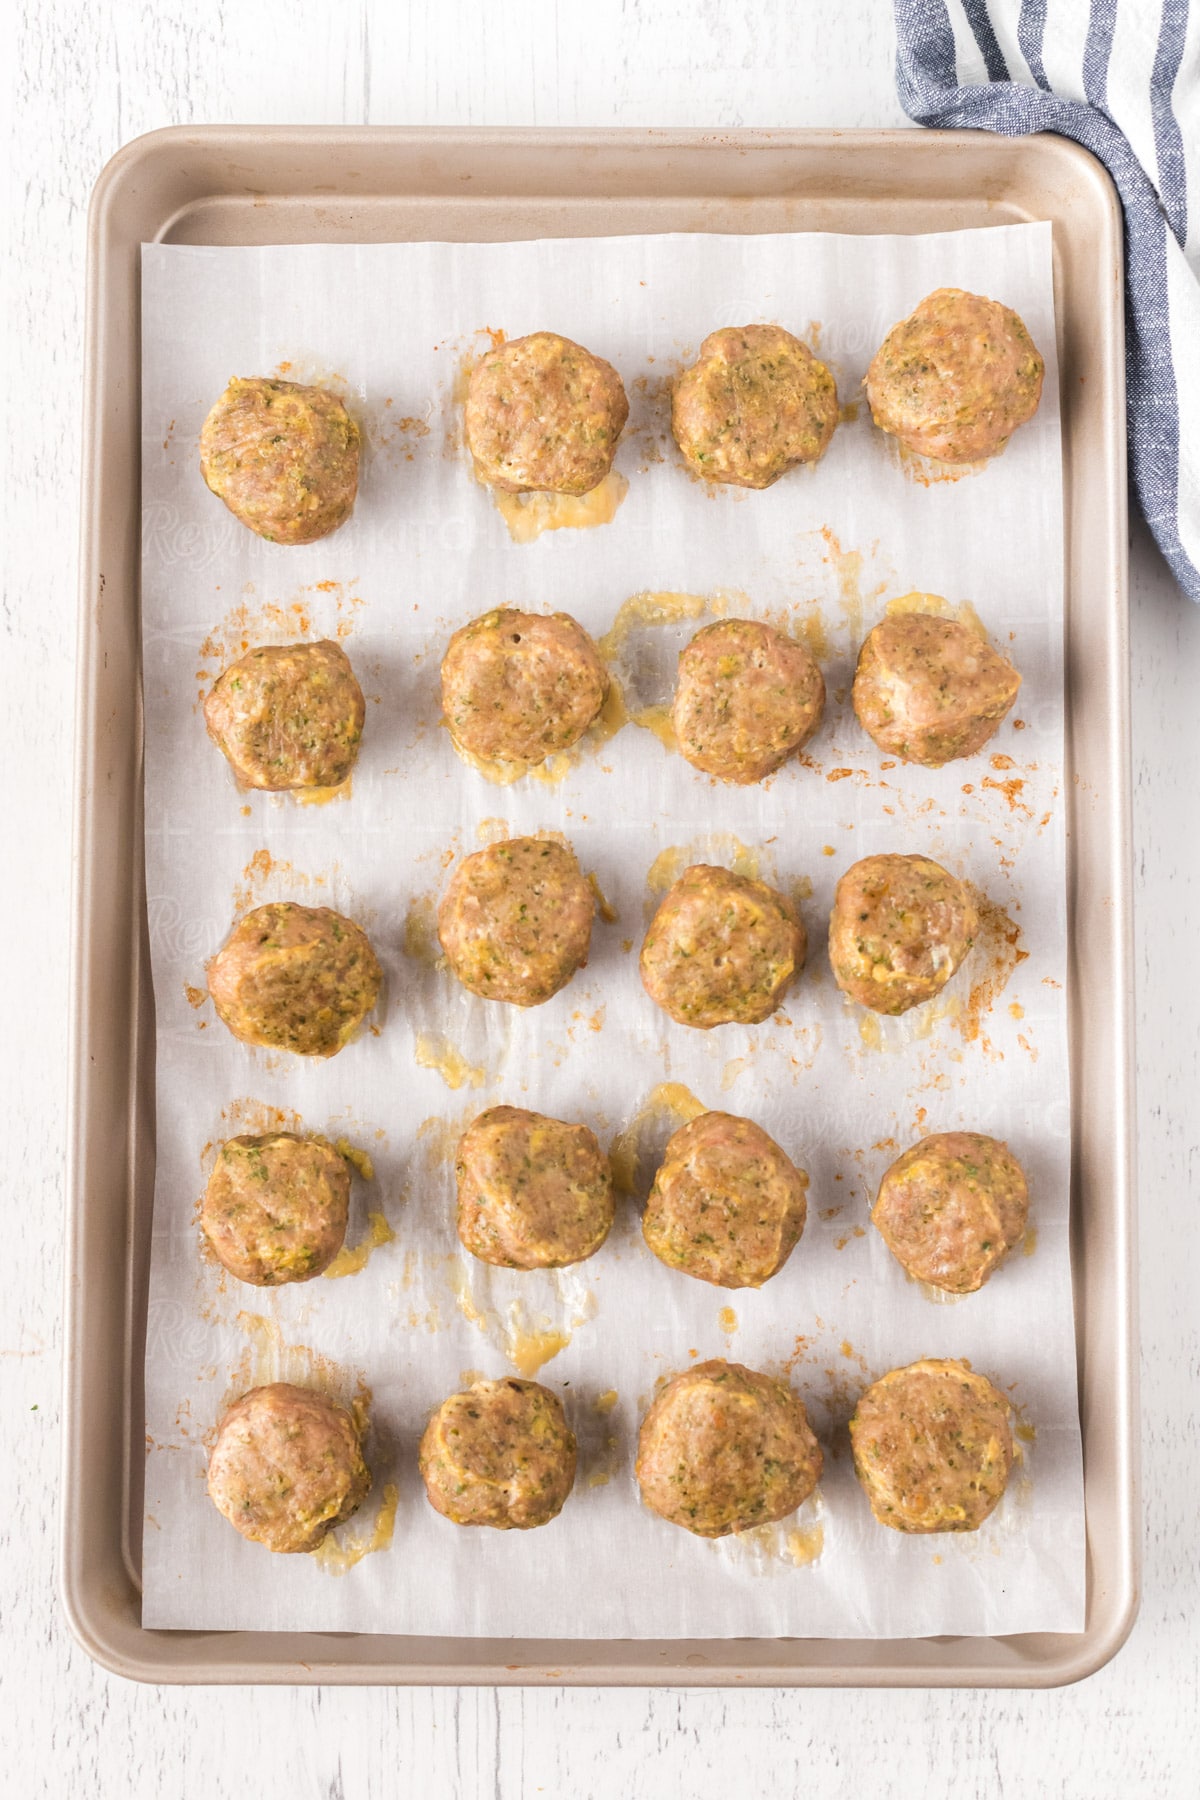 Baked turkey meatballs on a baking sheet with parchment paper